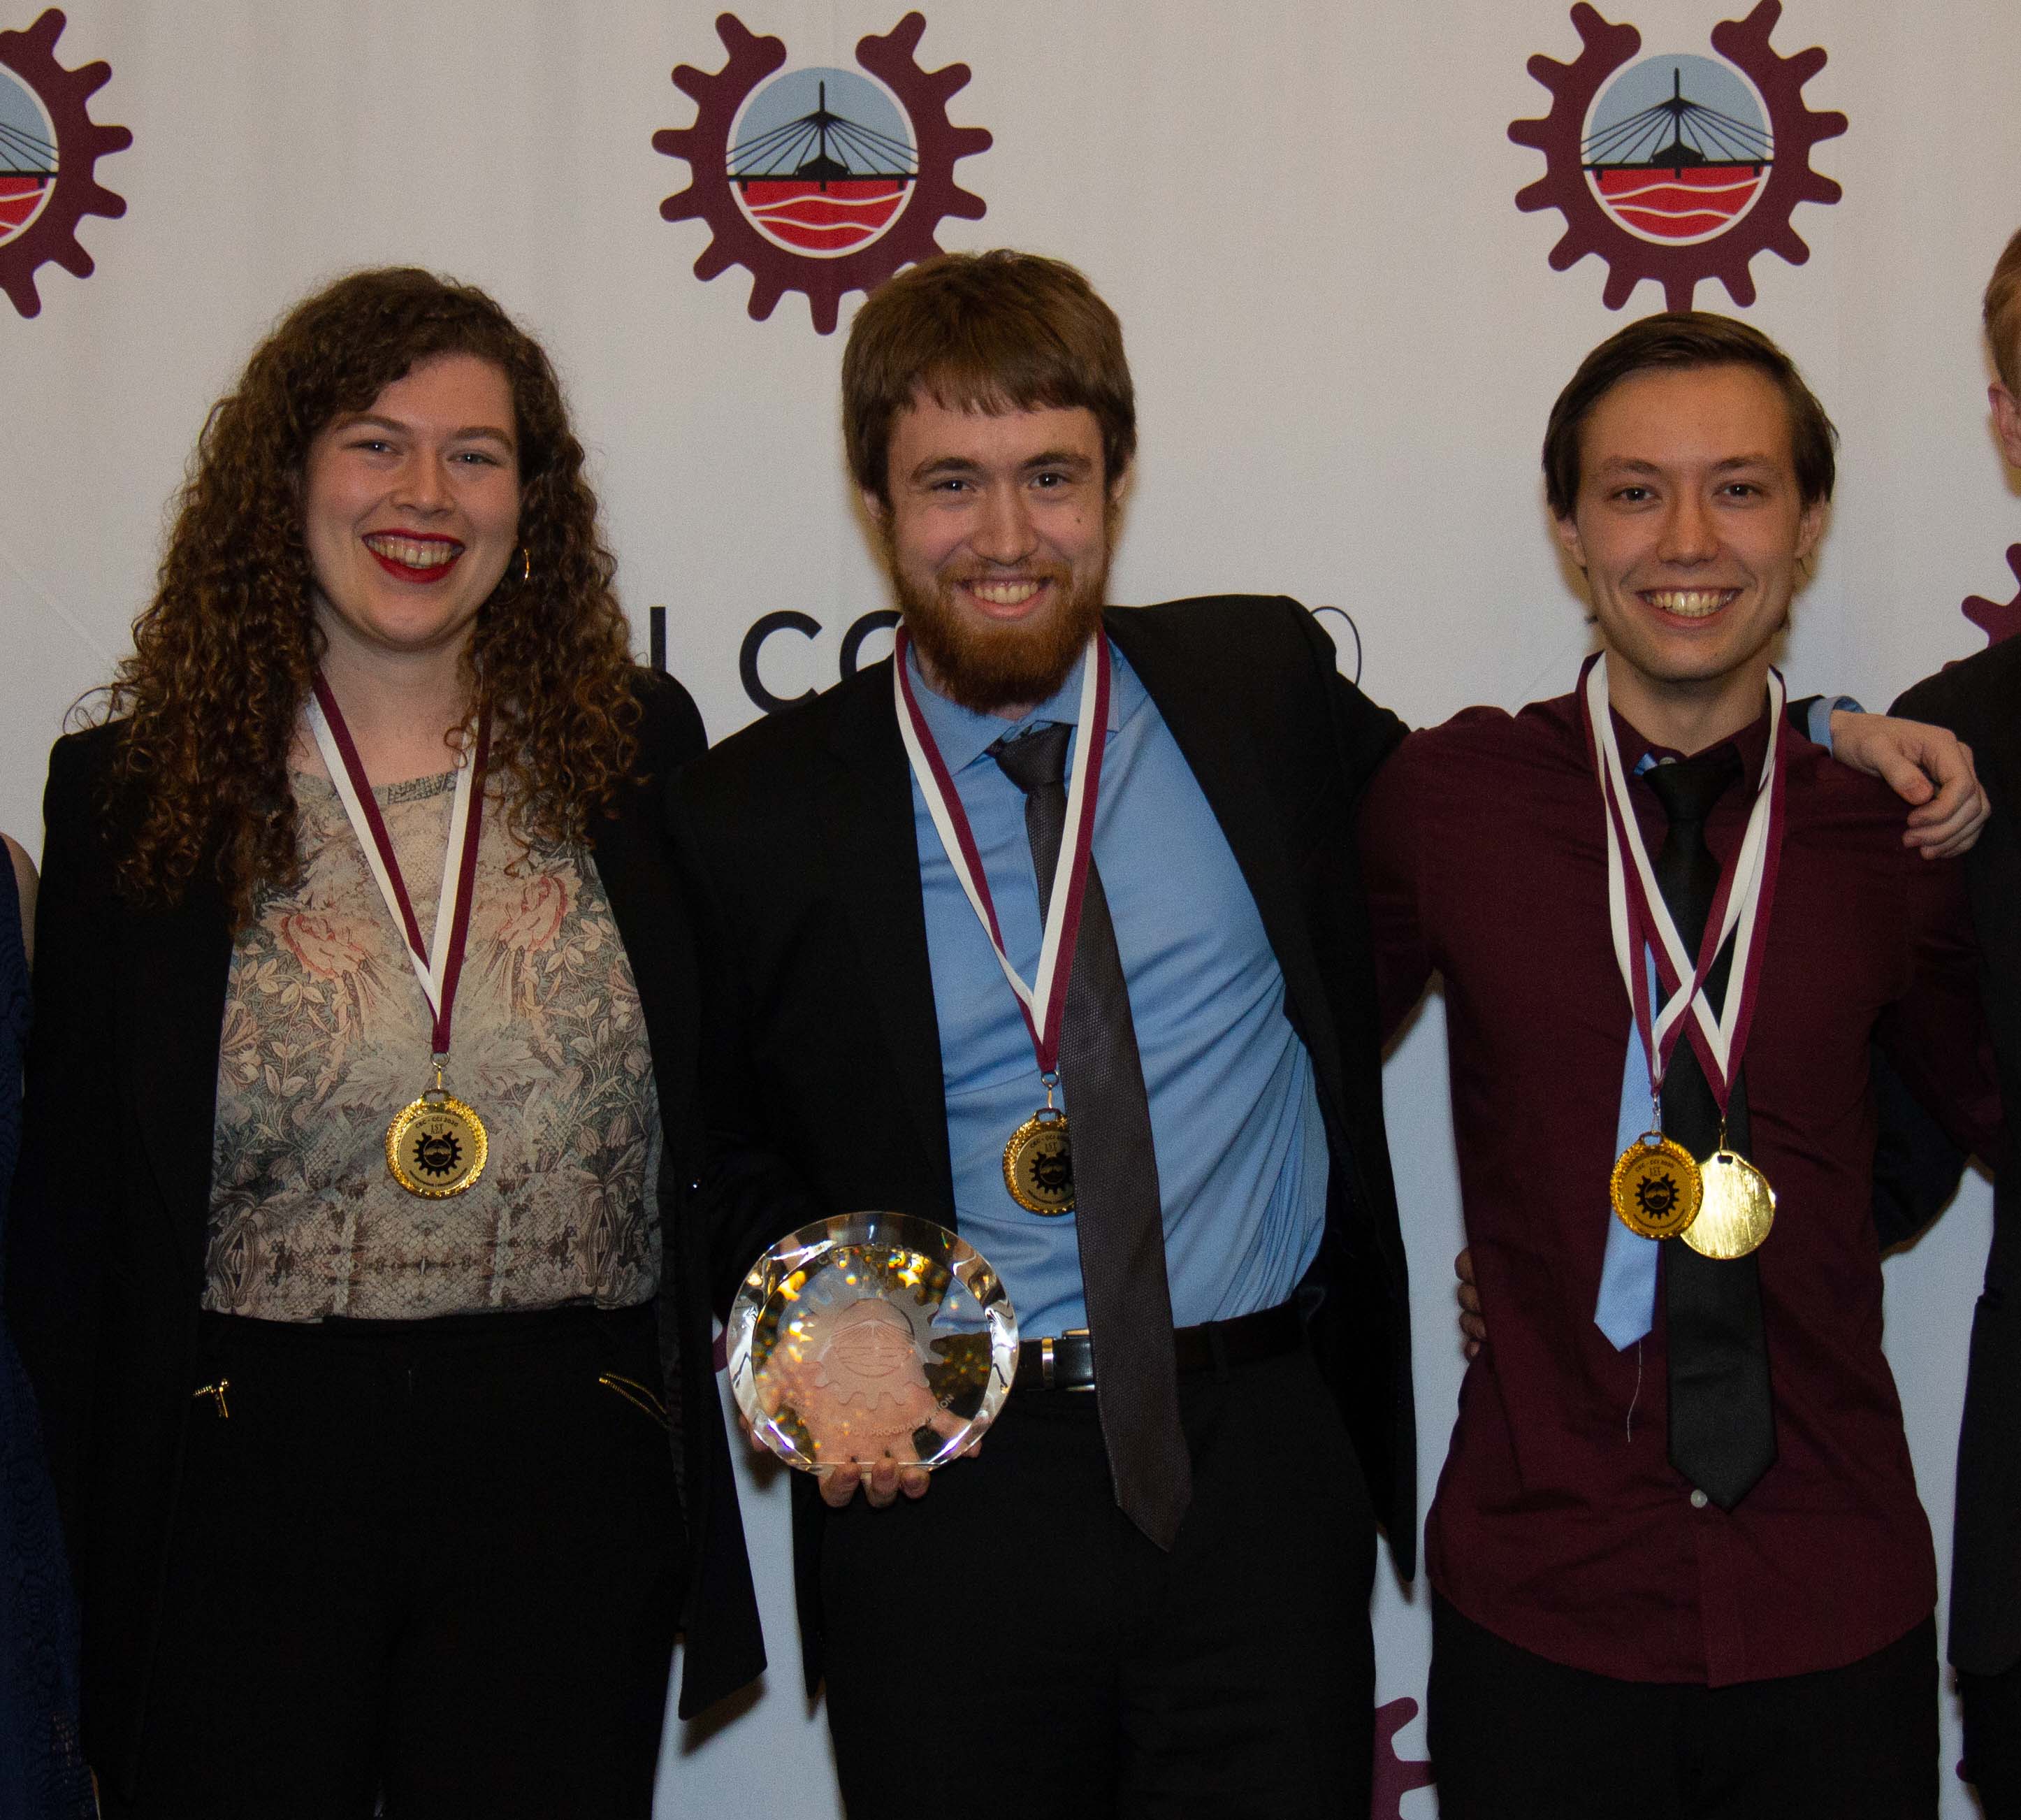 First place in the Programming challenge was awarded to Waterloo software engineering students Jasper Chapman-Black, Céline O'Neil and Sean Purcell.